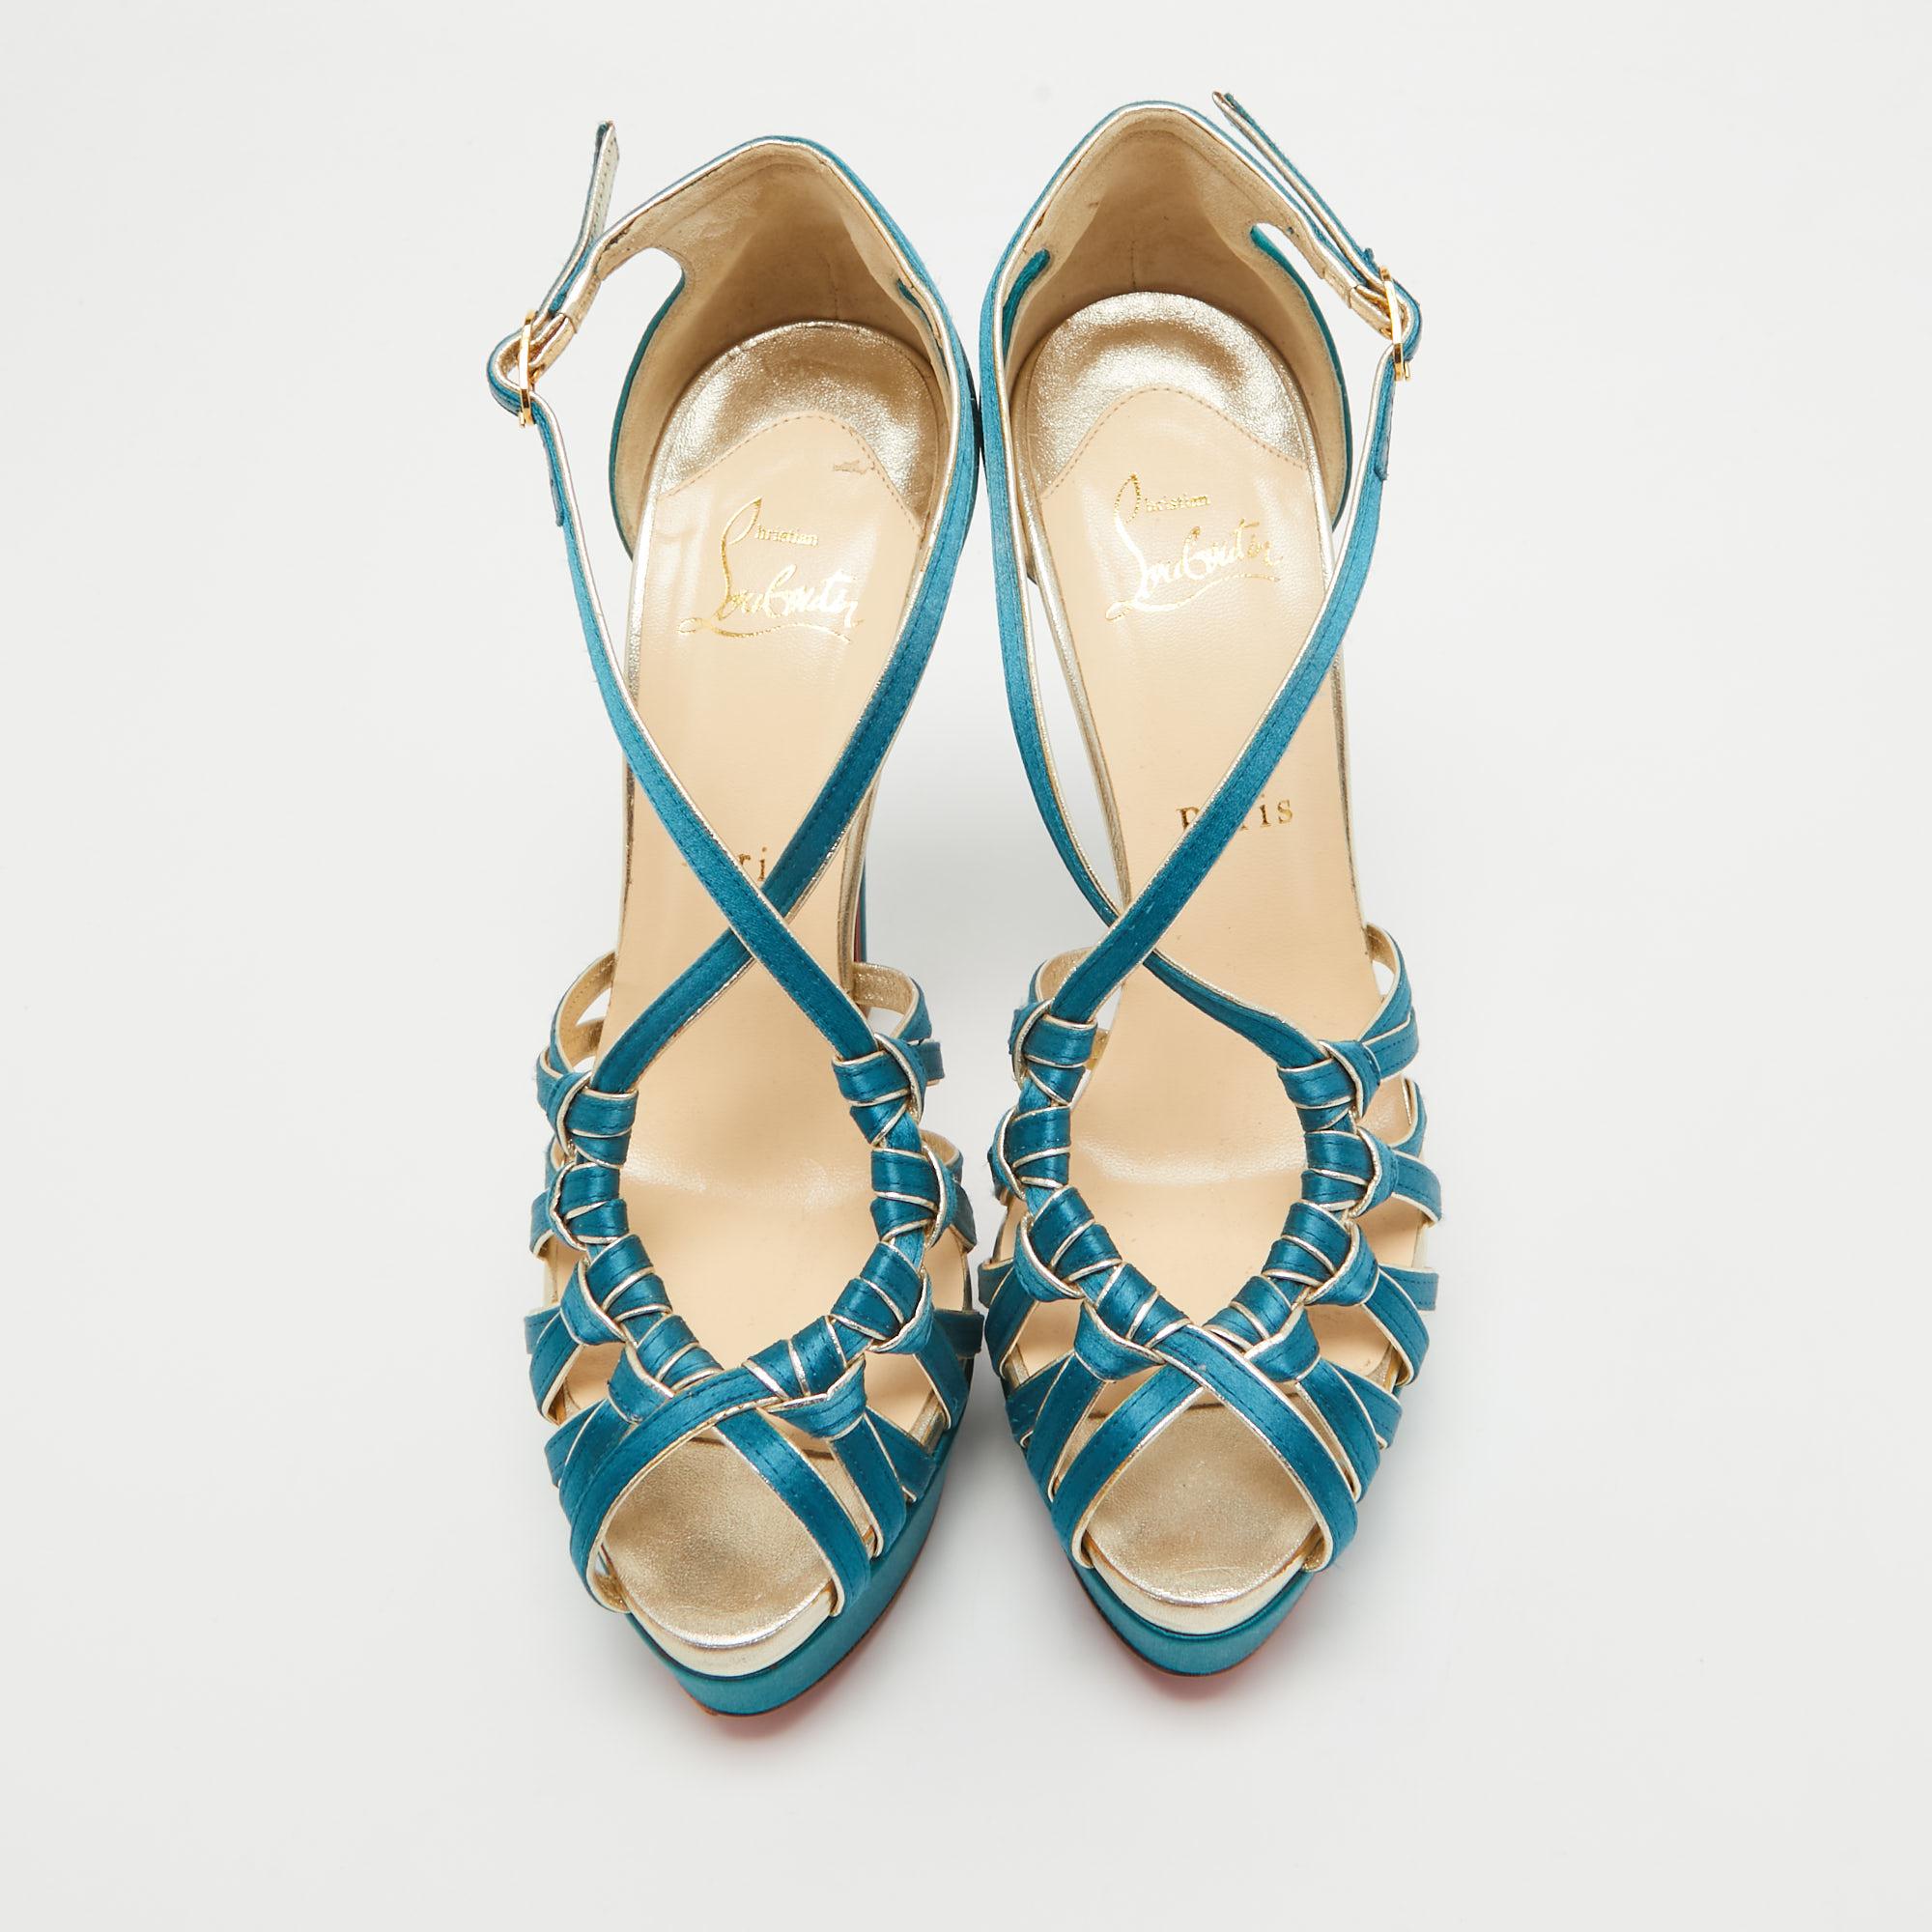 Women's Christian Louboutin Teal Satin Knotted Strappy Platform Sandals Size 39 For Sale